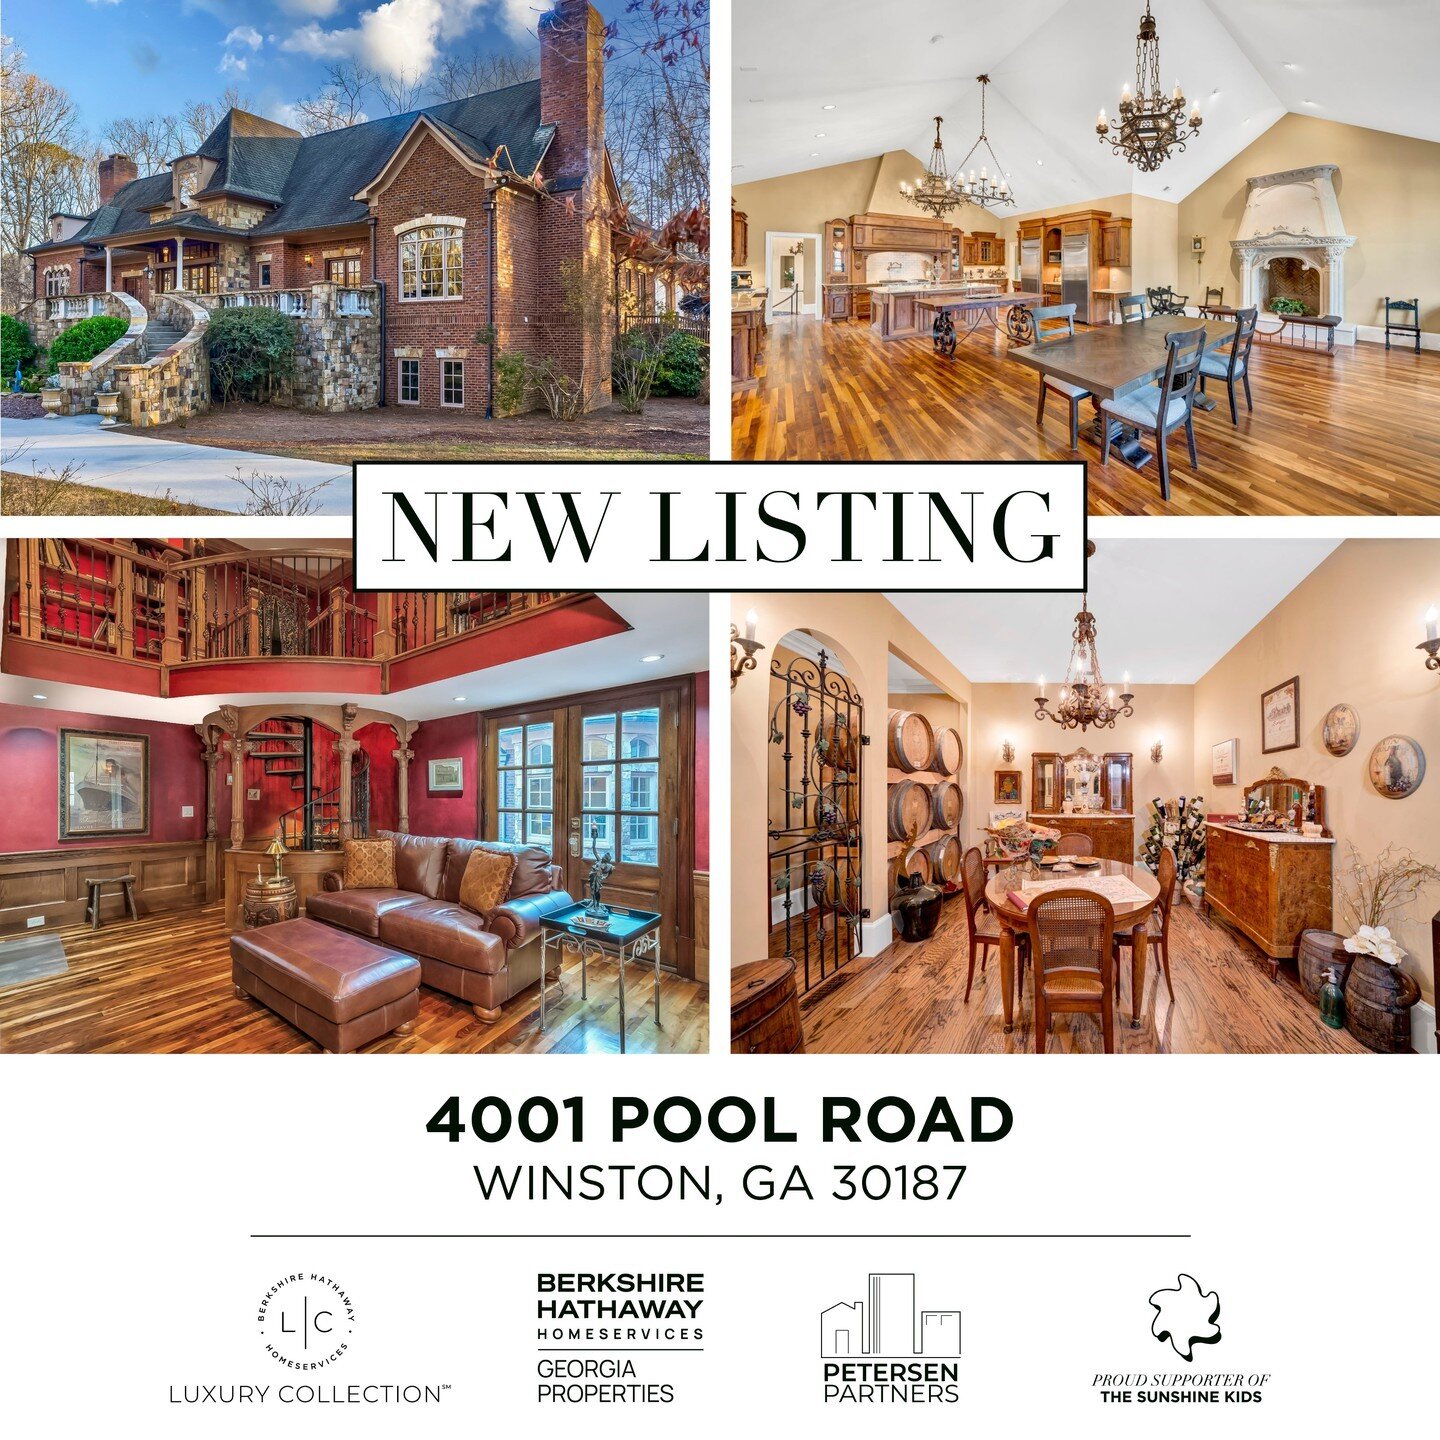 New listing alert! This gorgeous luxury home on 11 acres in the beautiful Winston, GA. This grand, European inspired home truly has it all. Click the link below on the beautiful property:

https://bit.ly/4001PoolRoad

#HomesforSaleAroundAtlanta #4001